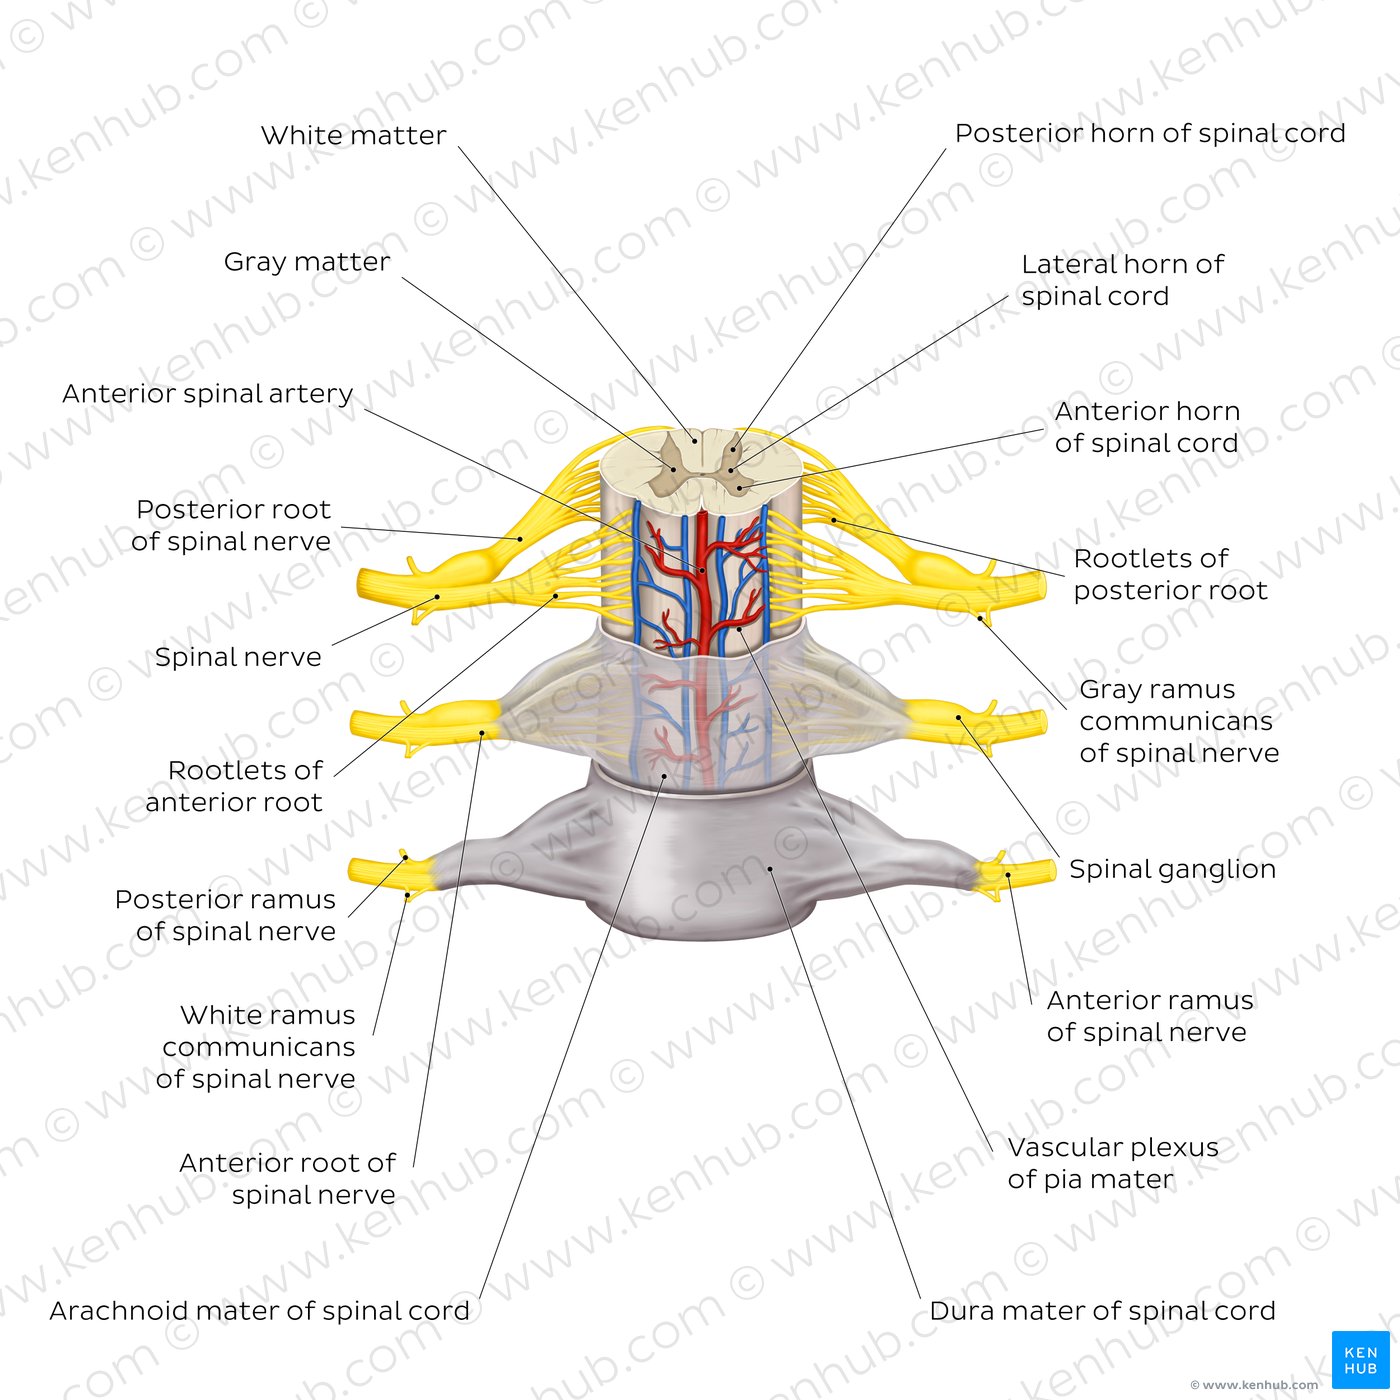 Spinal membranes and nerve roots (diagram)